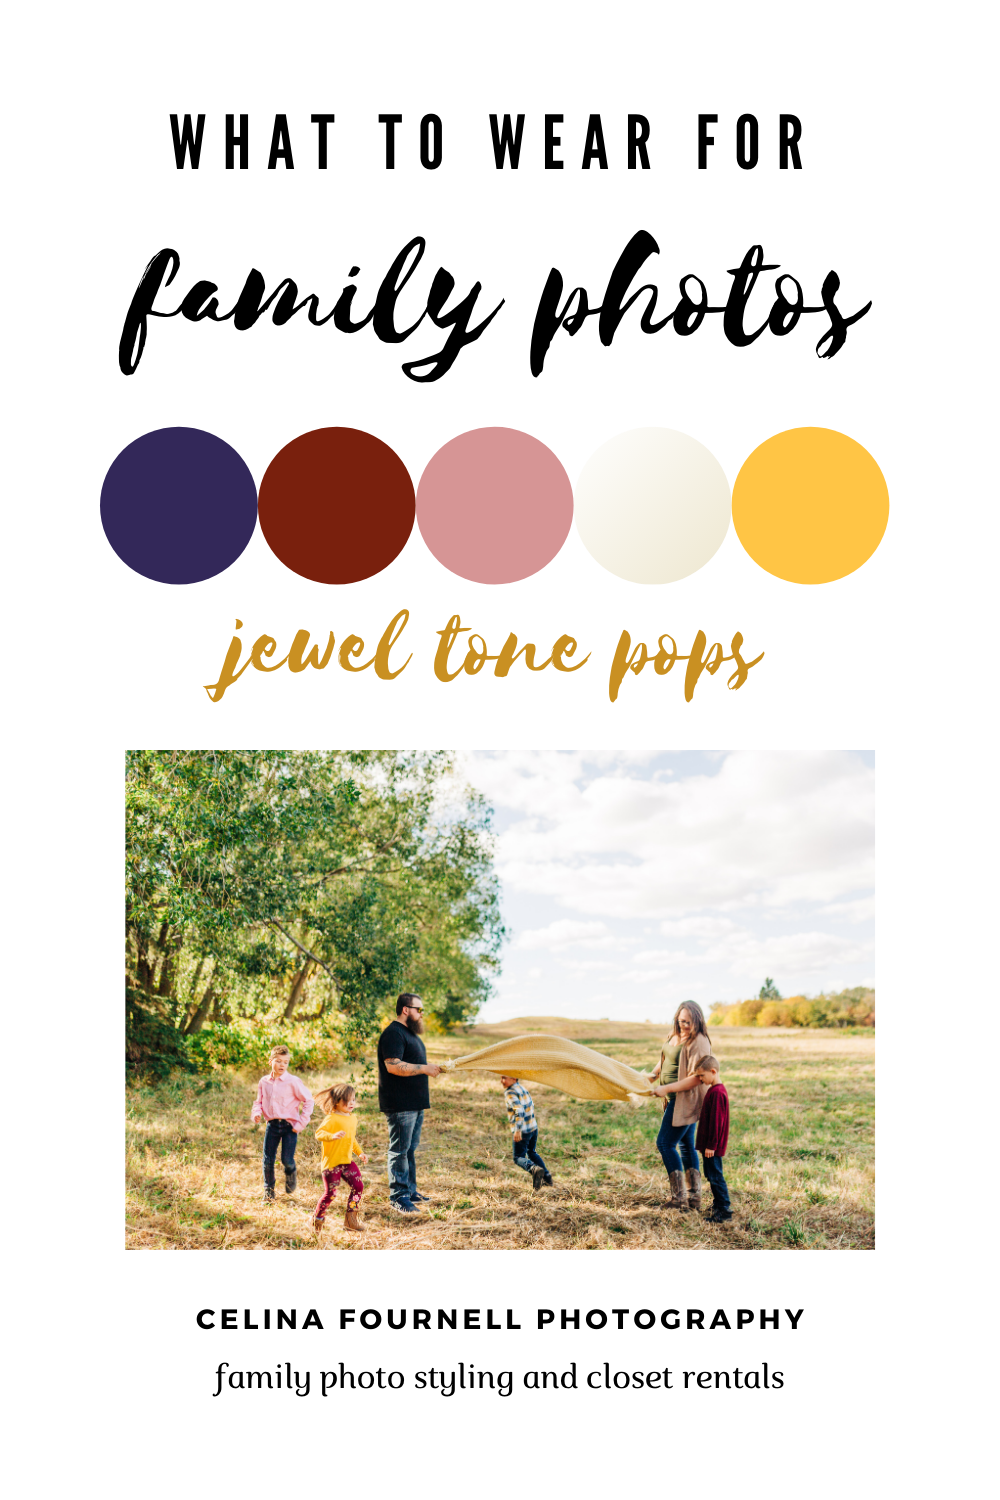 What to wear for family photos jewel tone pops